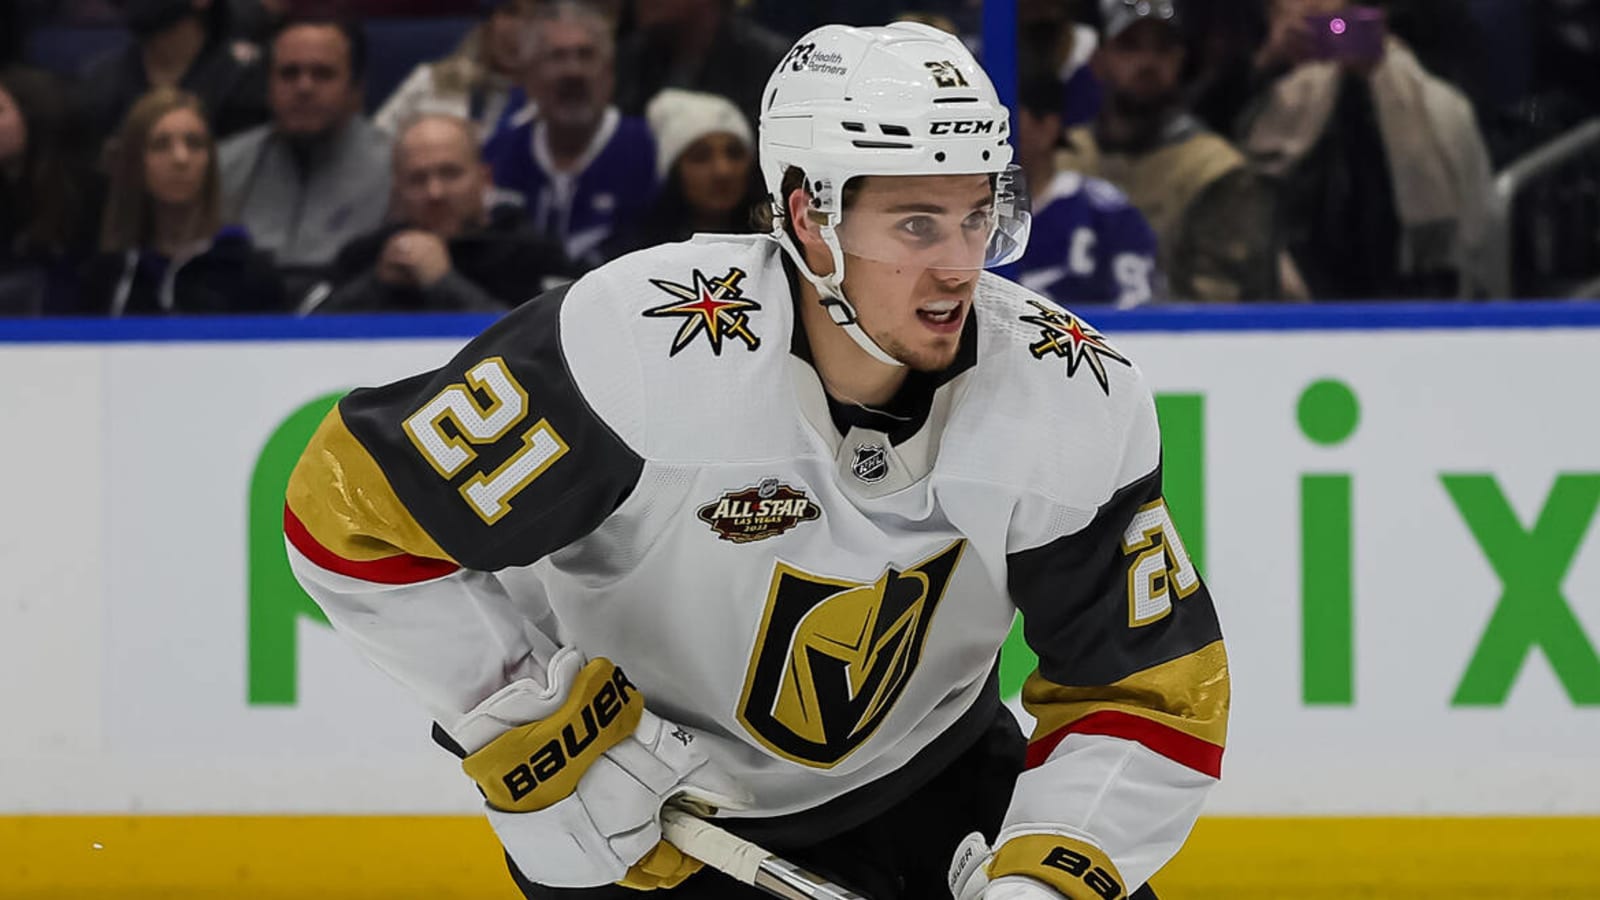 Looking at Golden Knights and Capitals’ newly found cap space